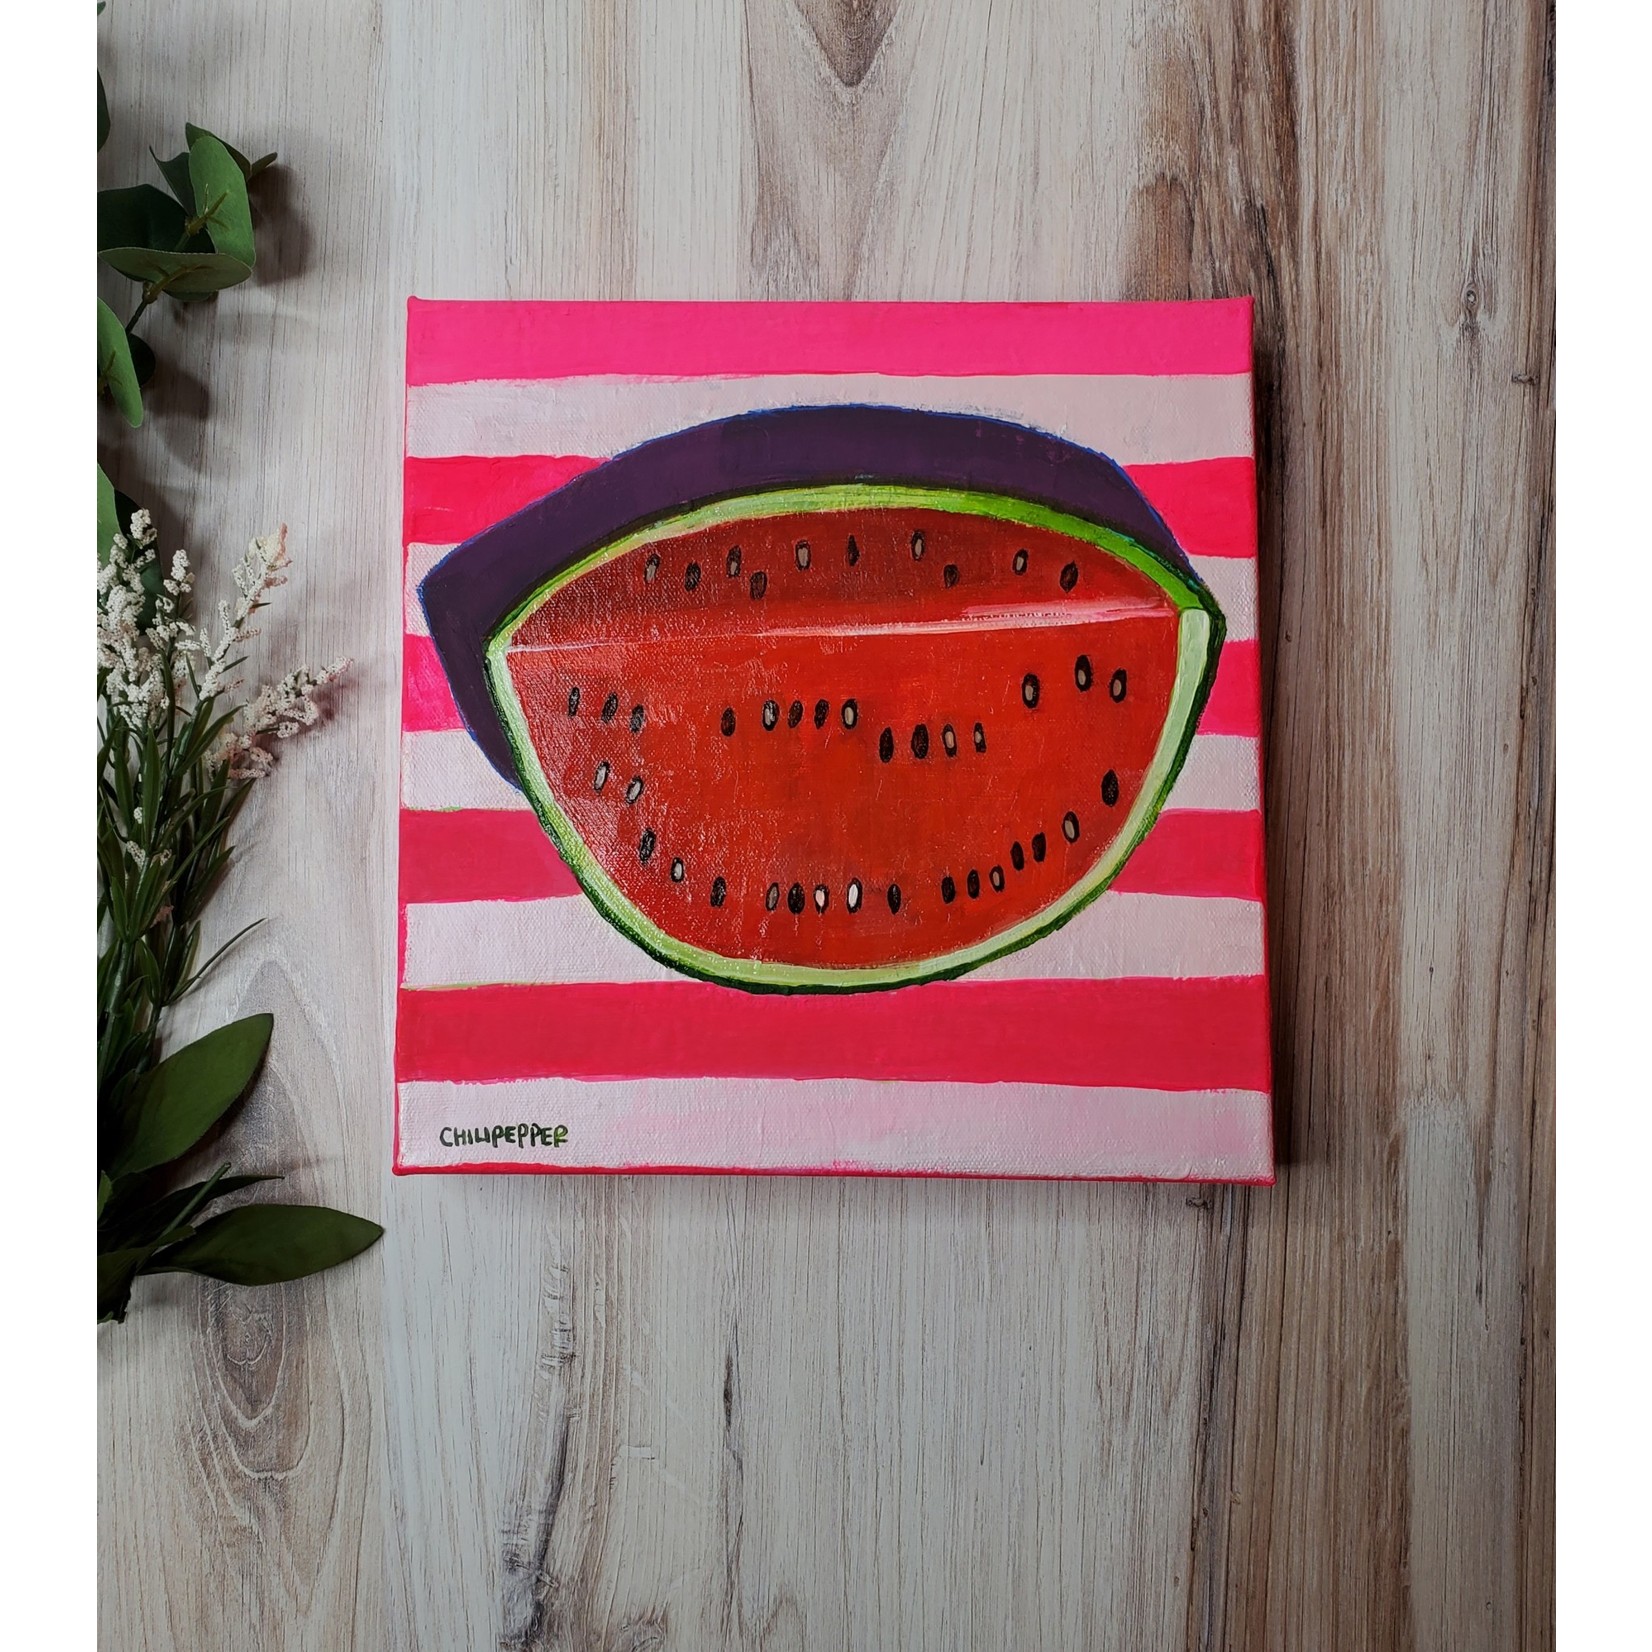 Chilipepper's Painting "During Summer Heat (Watermelon)" - Acrylic on canvas